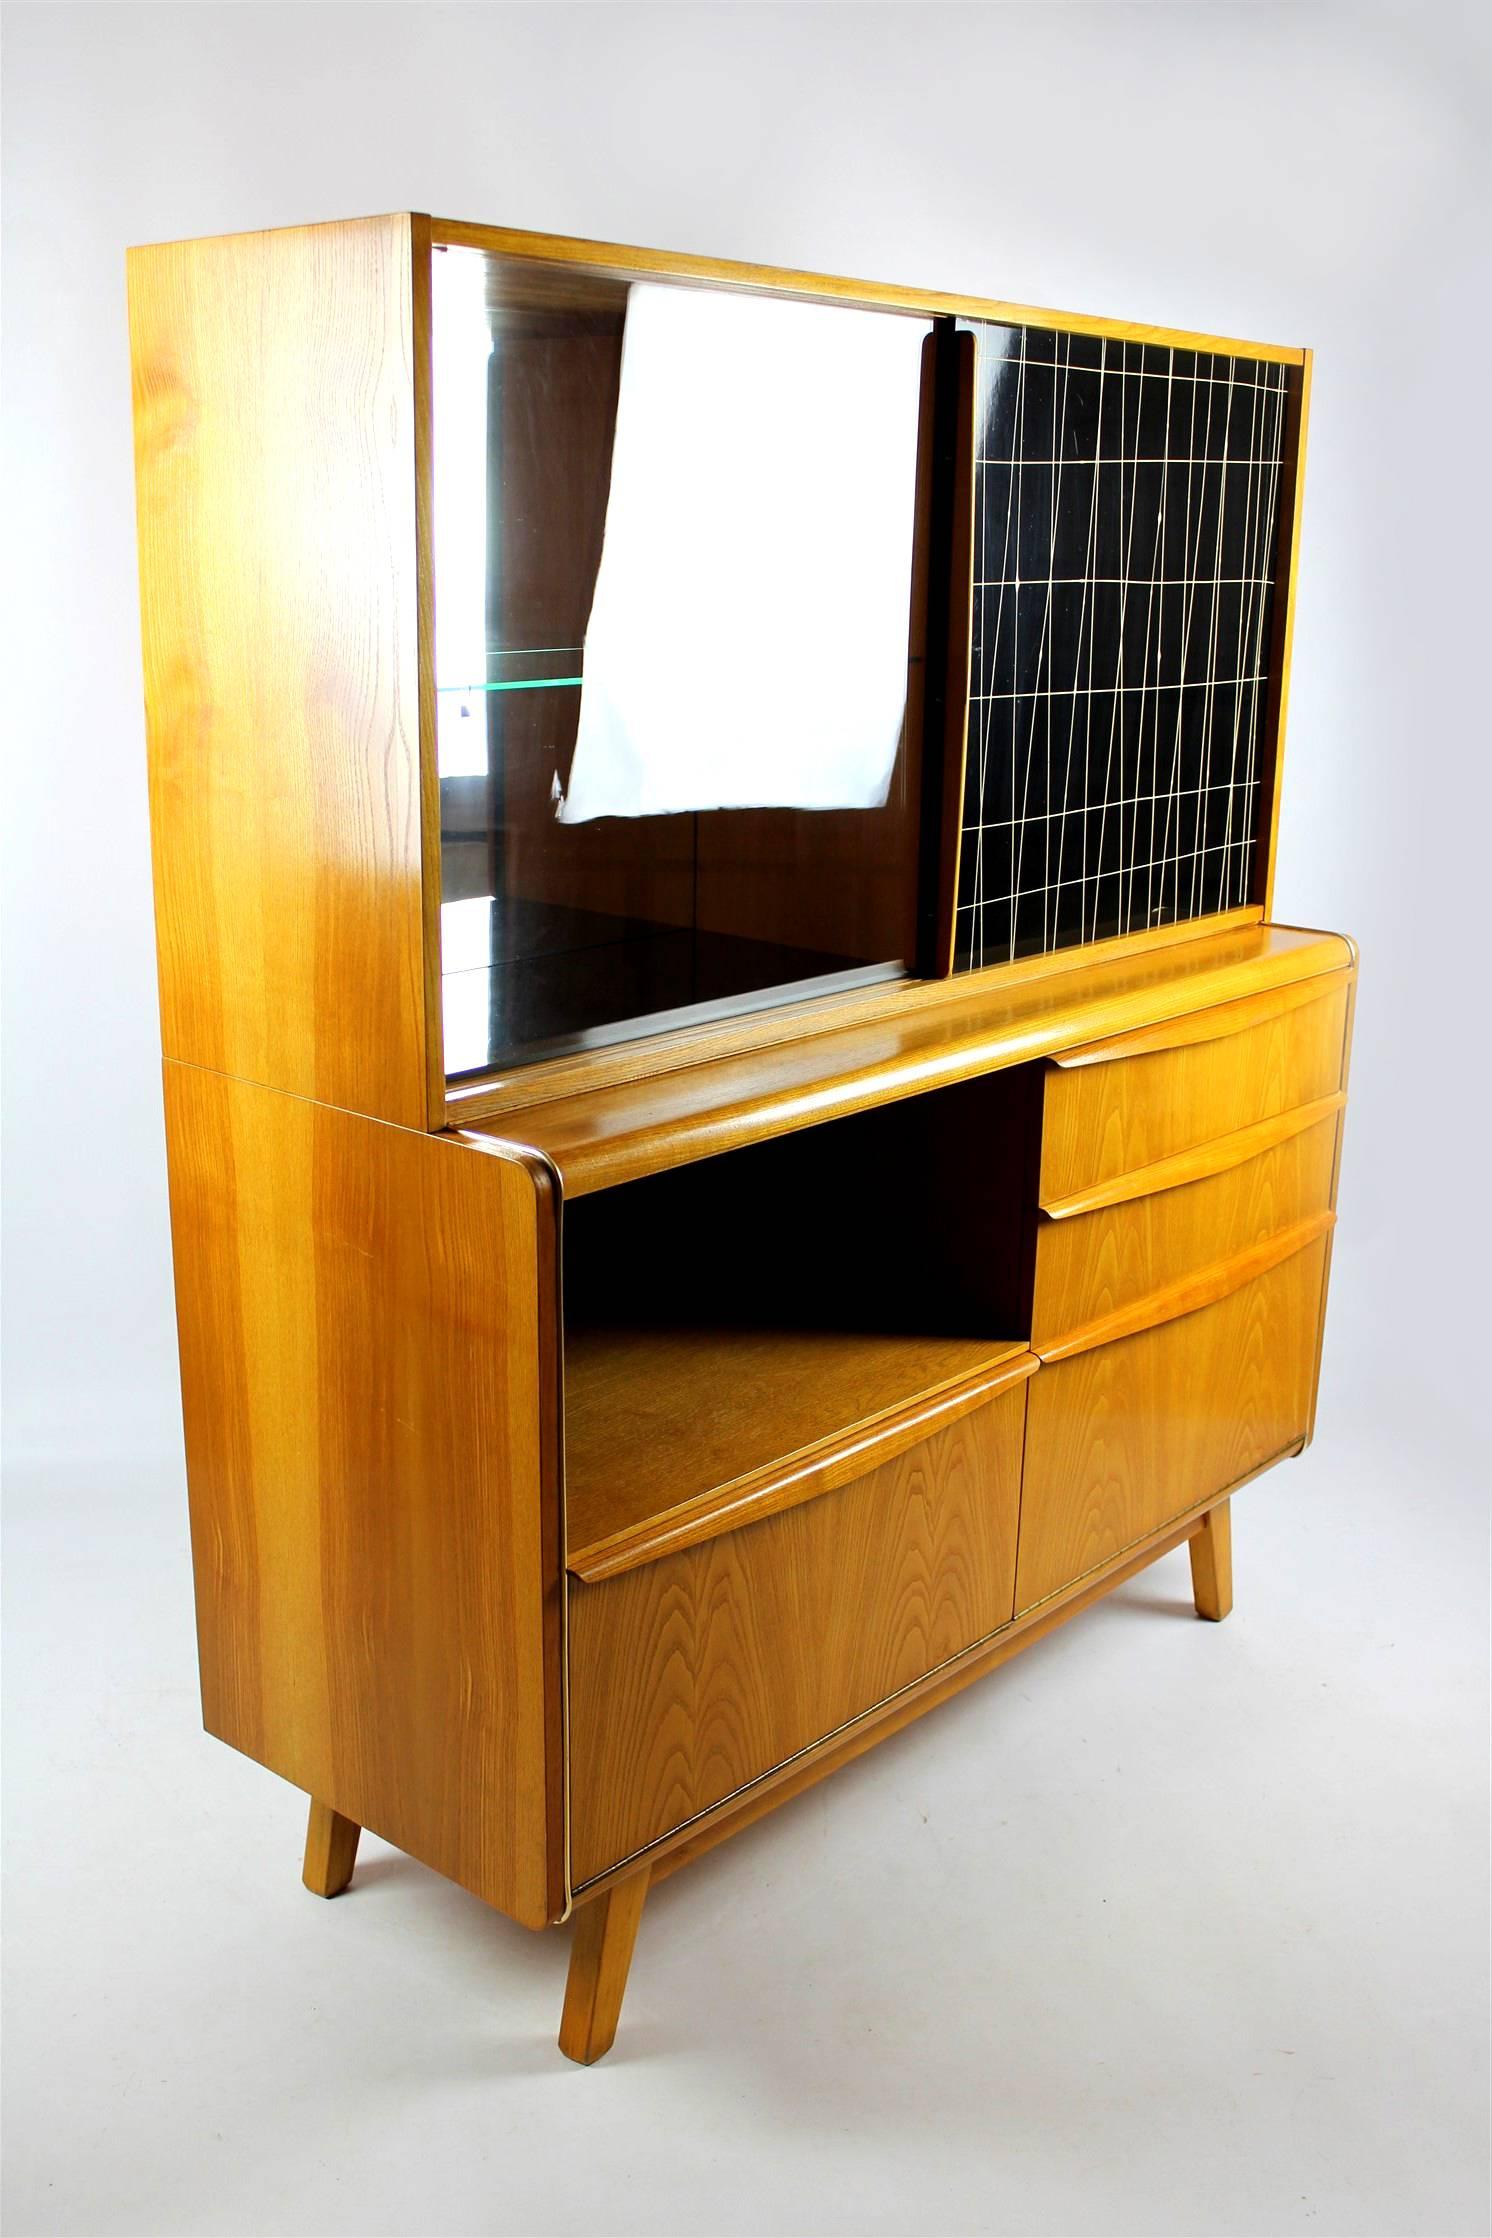 This bar cabinet from the 1960s was designed by Bohumil Landsman for Jitona. It features a thick glass top, two plastic drawers, sliding doors (one with the hand-painted pattern), and a bar cabinet. It is in original condition.